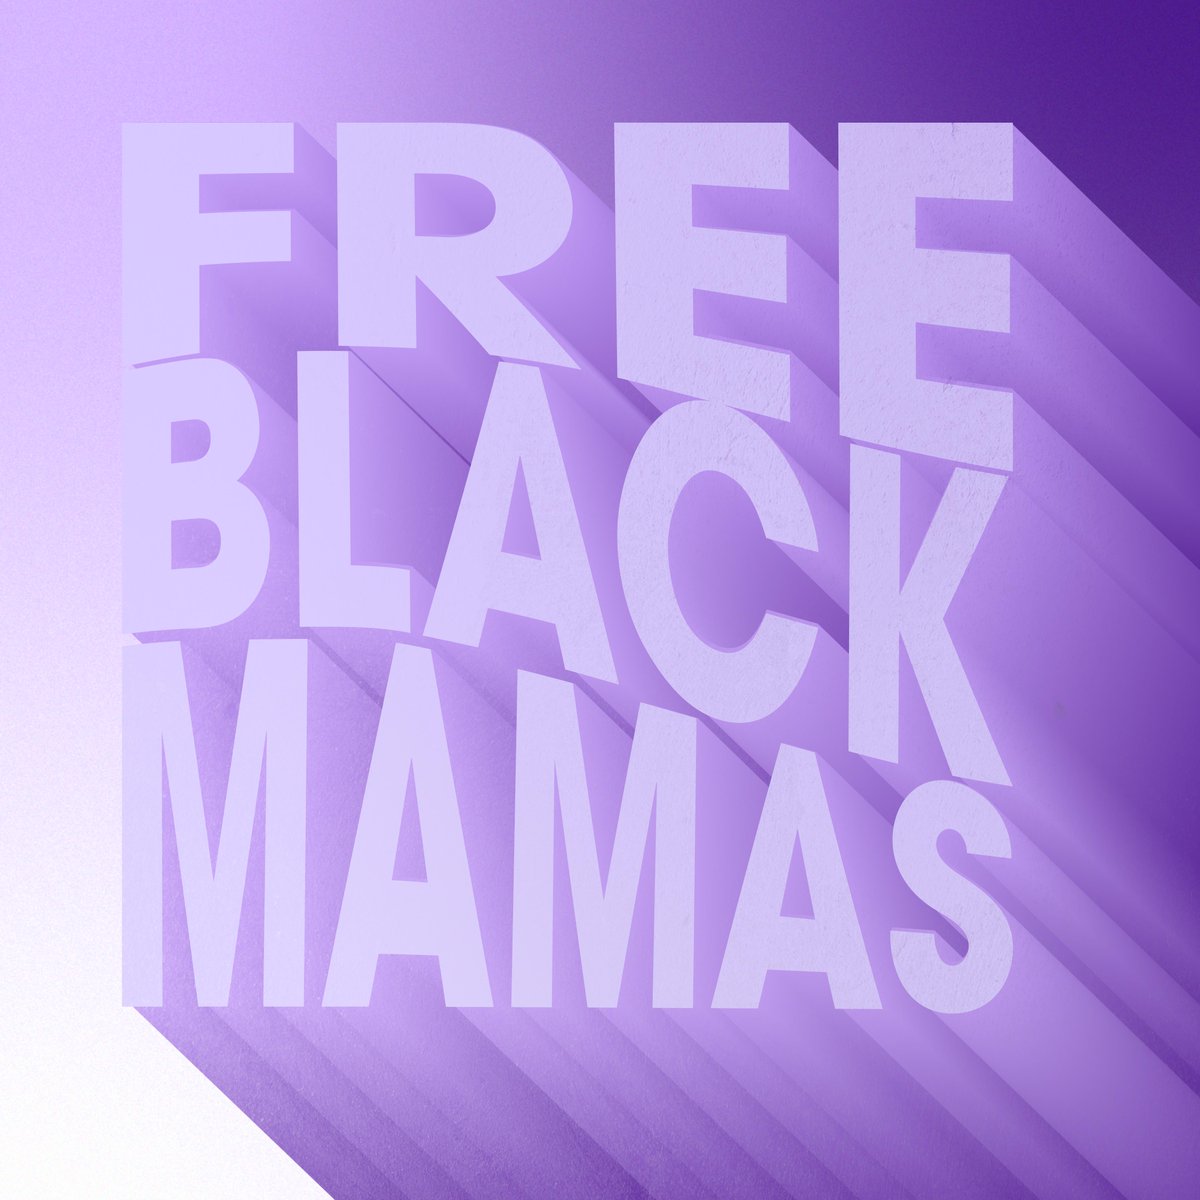 Each Mother’s Day, folks organize to #FreeBlackMamas by covering their bail & bringing them home. Help free Black mamas by chipping into your local bail fund or by donating to @NationalBailOut! bit.ly/freeblackmamas…